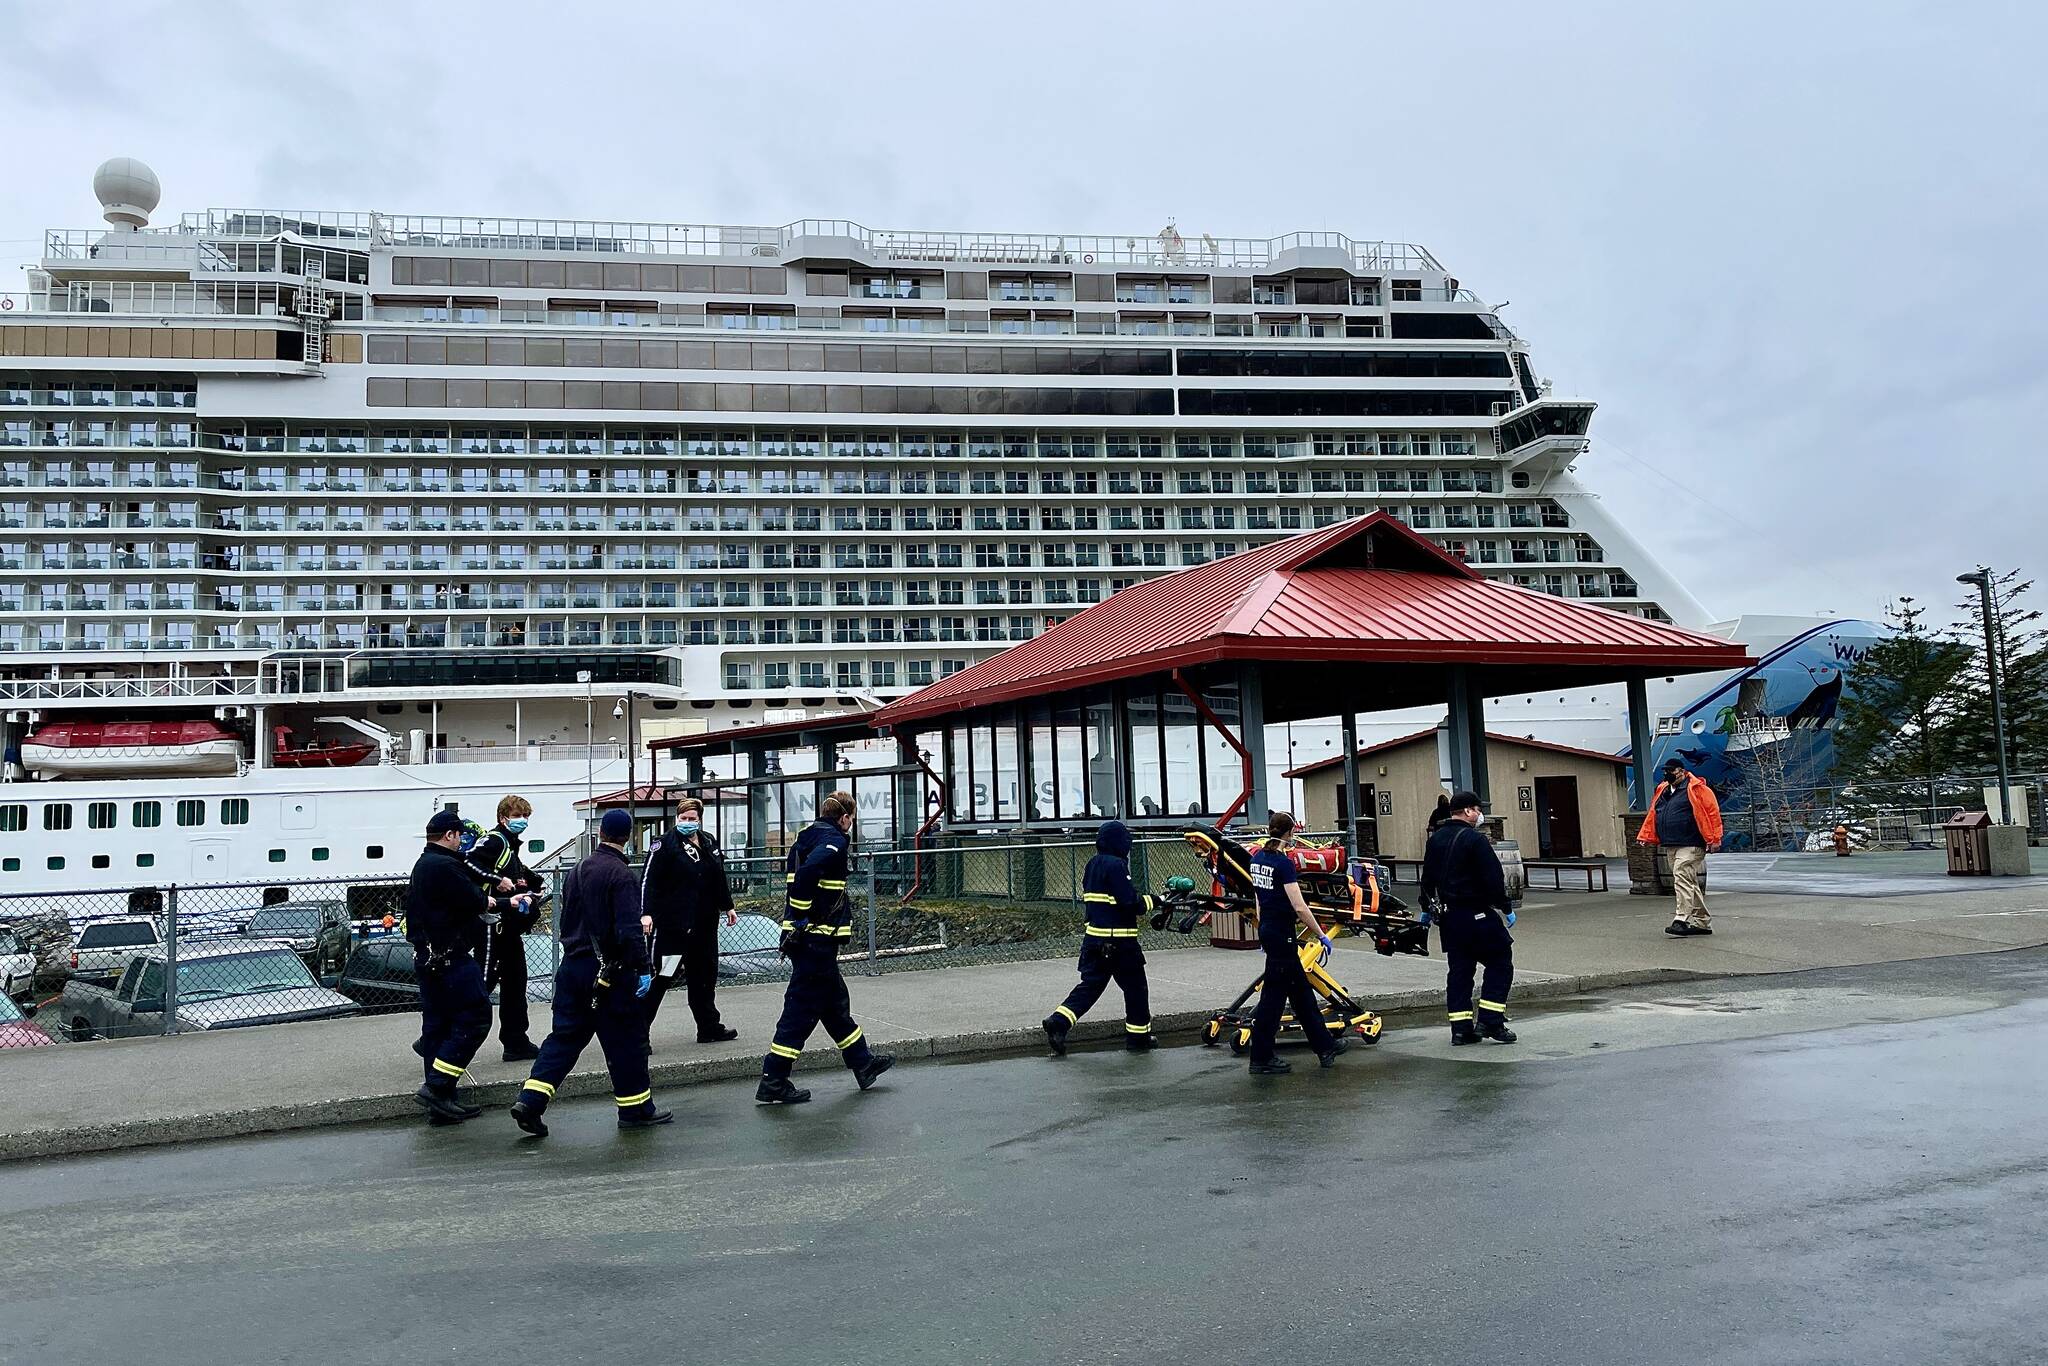 Capital City Fire/Rescue personnel go to transport a patient for medevac from the Norwegian Bliss, the first vessel of the 2022 cruise season, on April 25, 2022. (Michael S. Lockett / Juneau Empire)